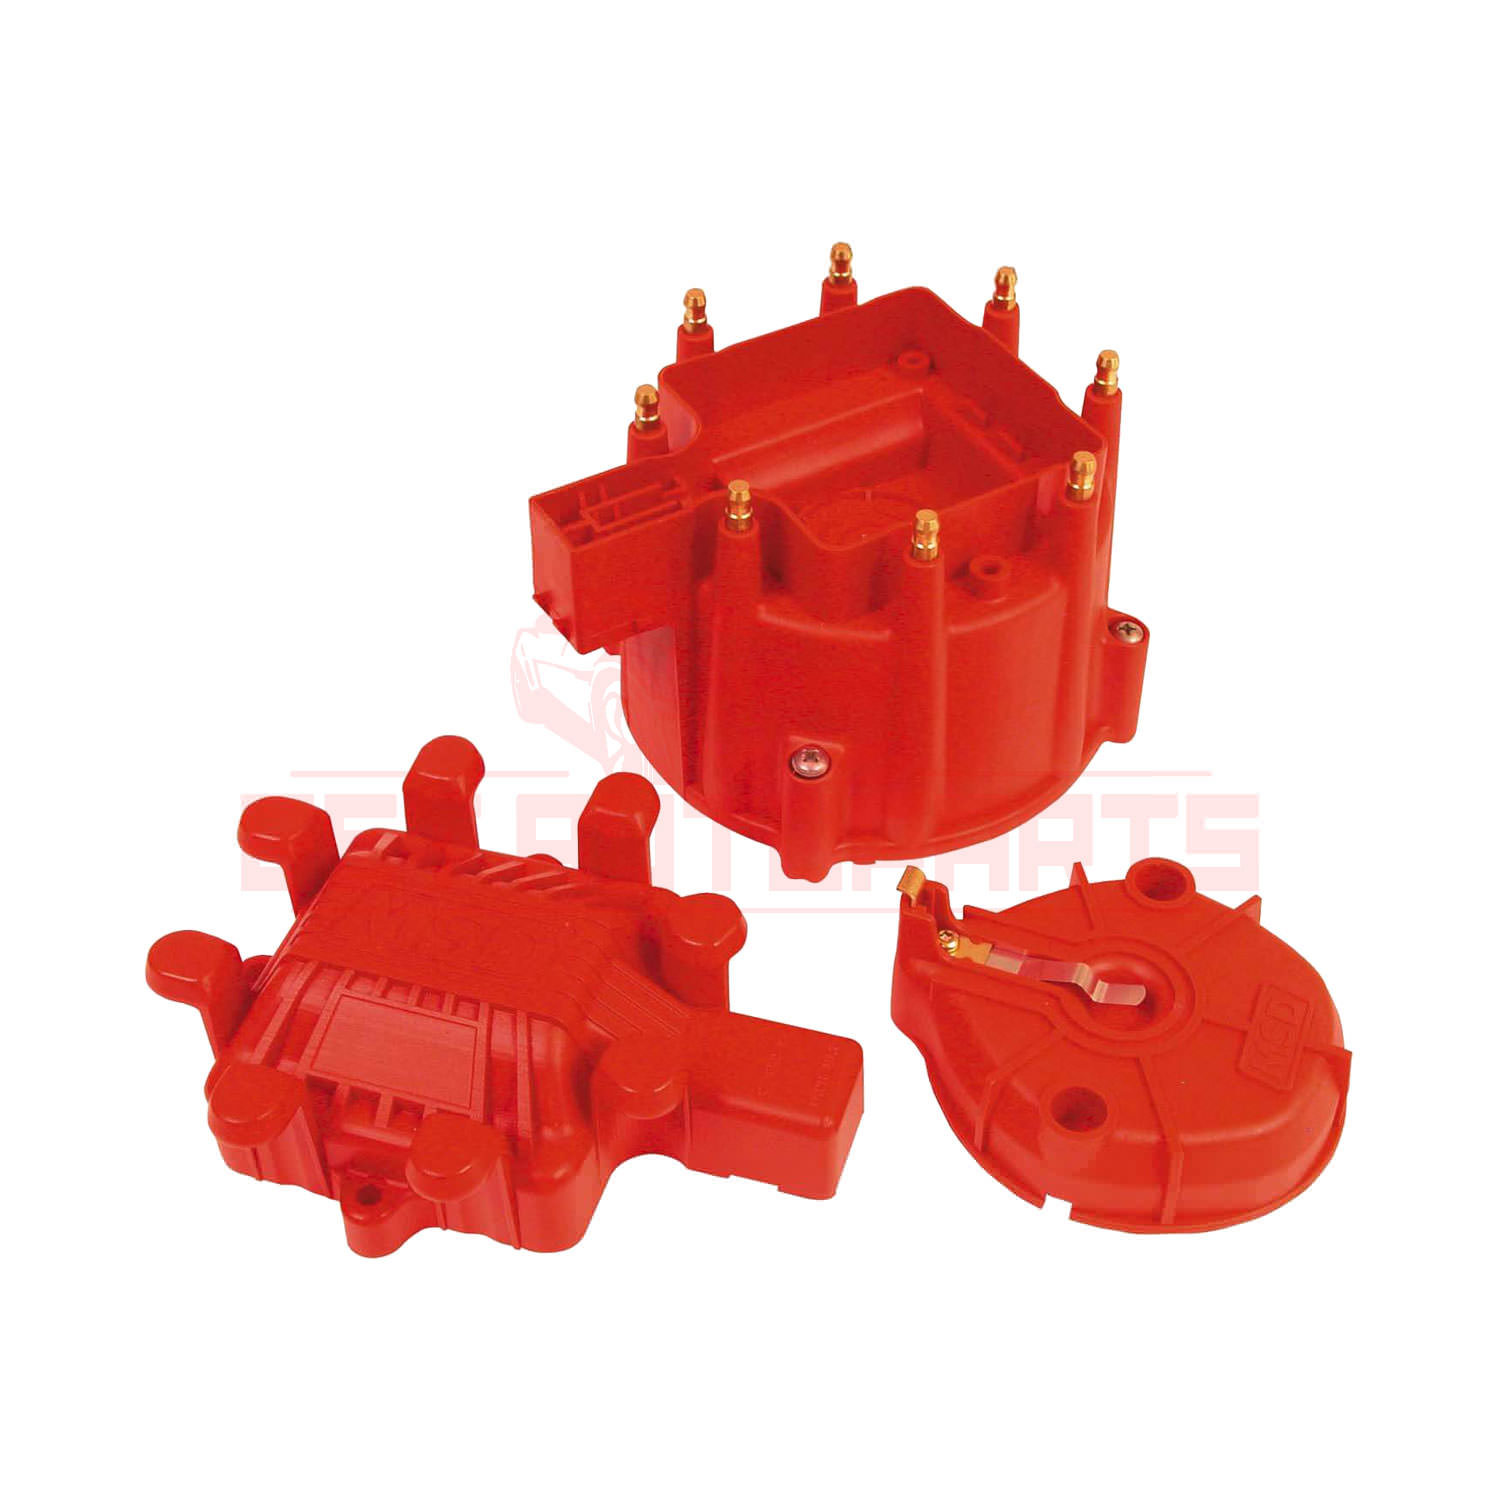 MSD Distributor Cap and Rotor Kit compatible with GMC C15 75-1978